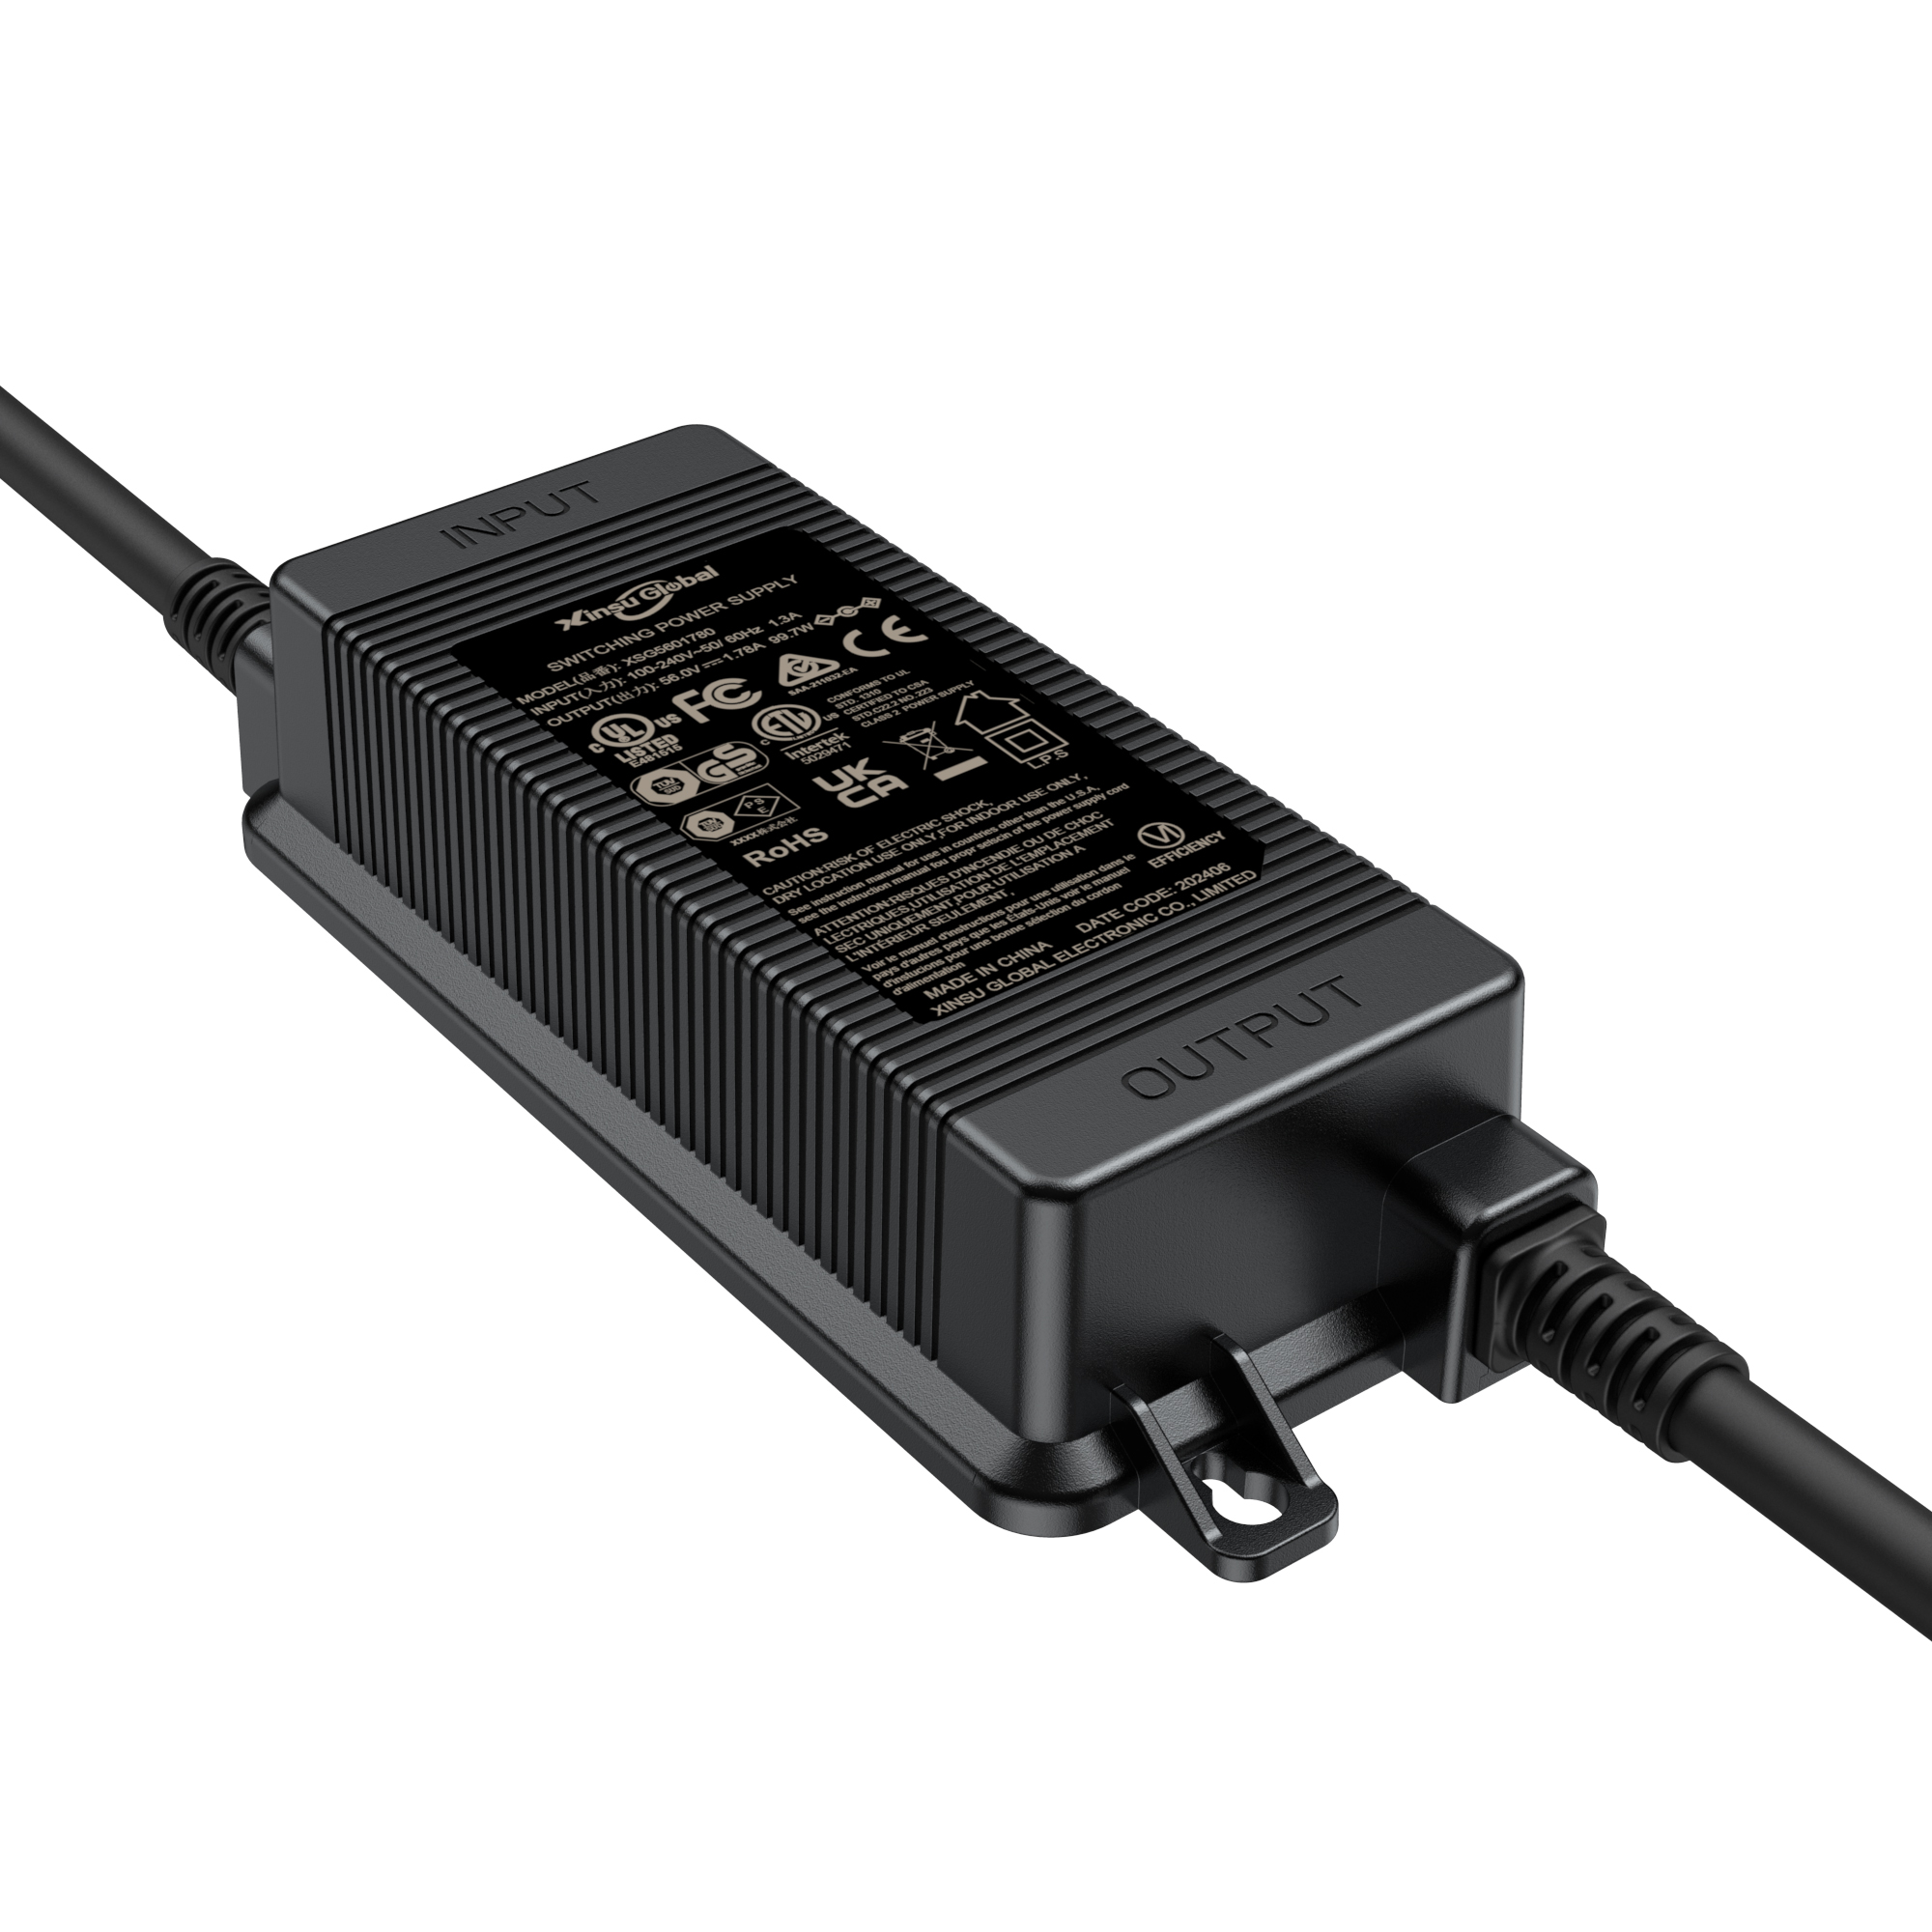 EN60335-2-29 29.4V 2A Waterproof Charger IP65 IP67 for Pool Robot Cleaner Electric Outboard